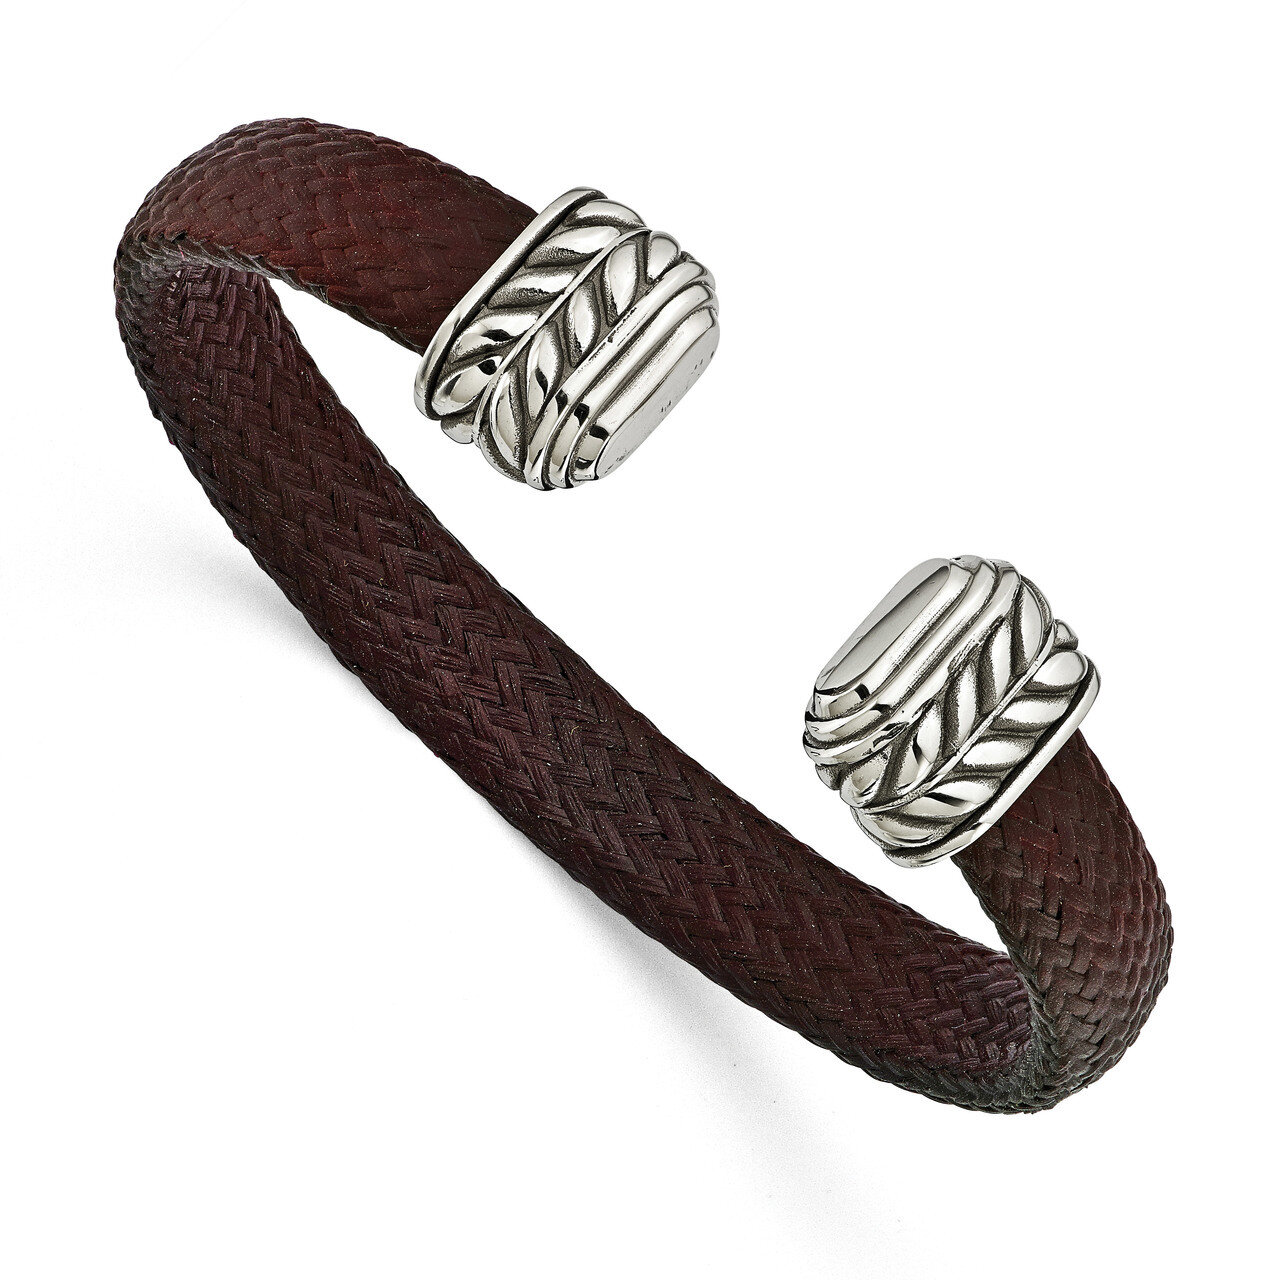 Edward Mirell 10mm Stainless Steel with Carbon Fiber Cuff Bracelet